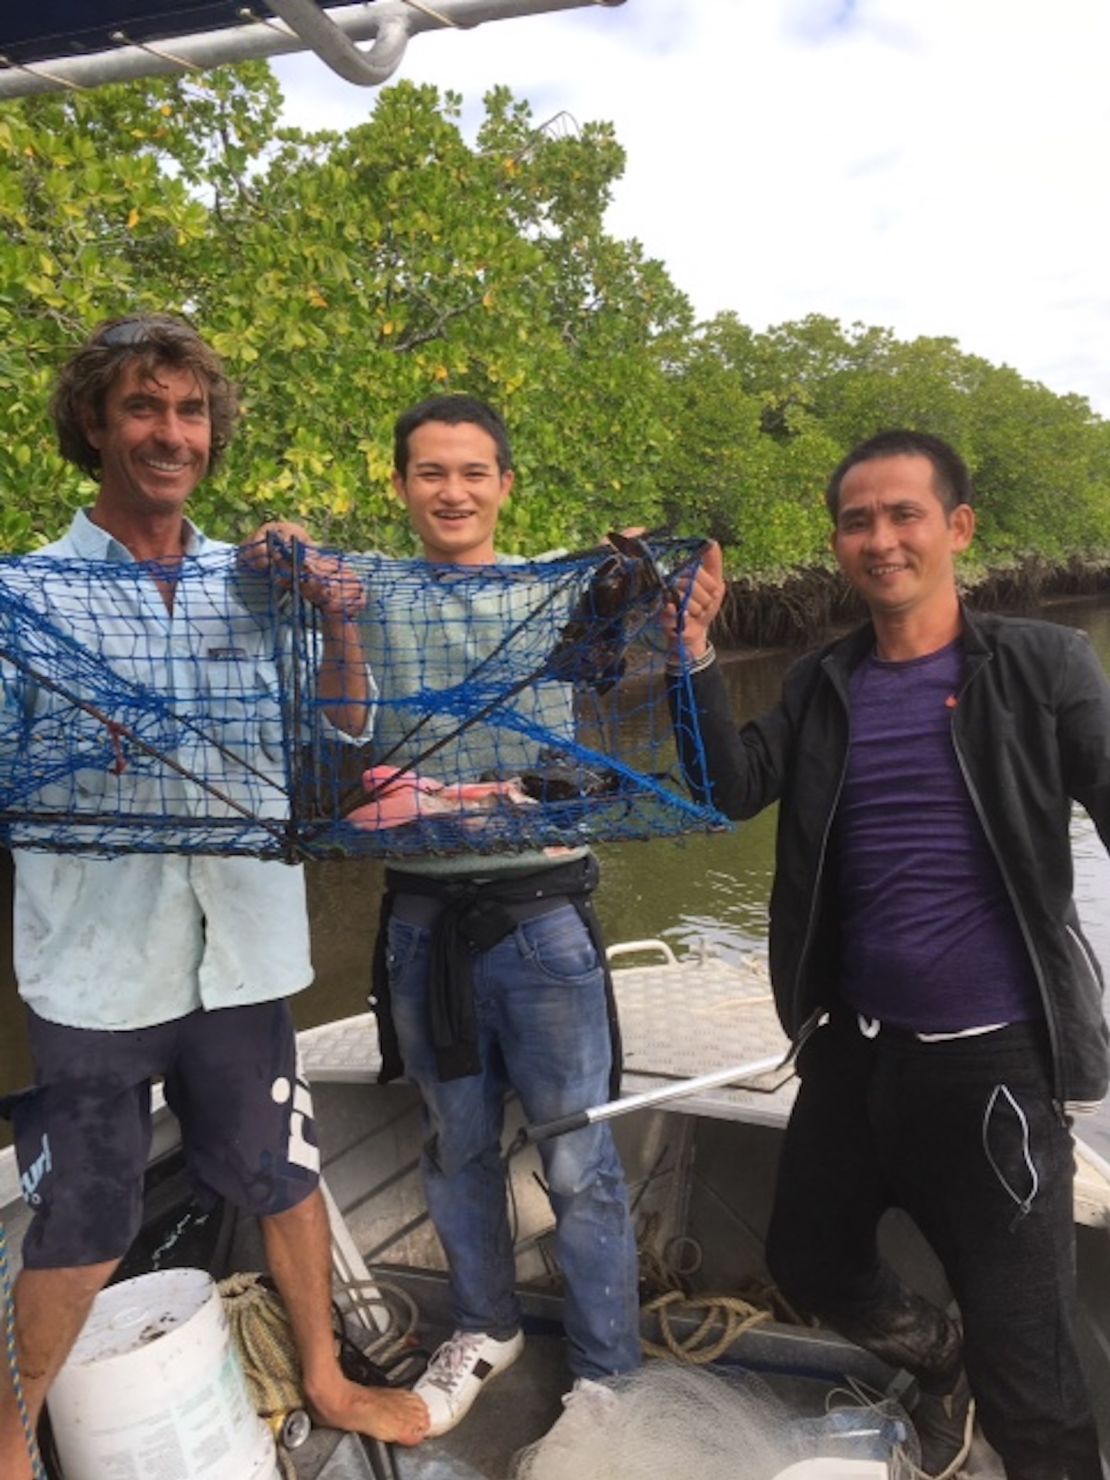 Preston holds up a crab pot with the two men he and Justin Ward picked up on the Daintree River.